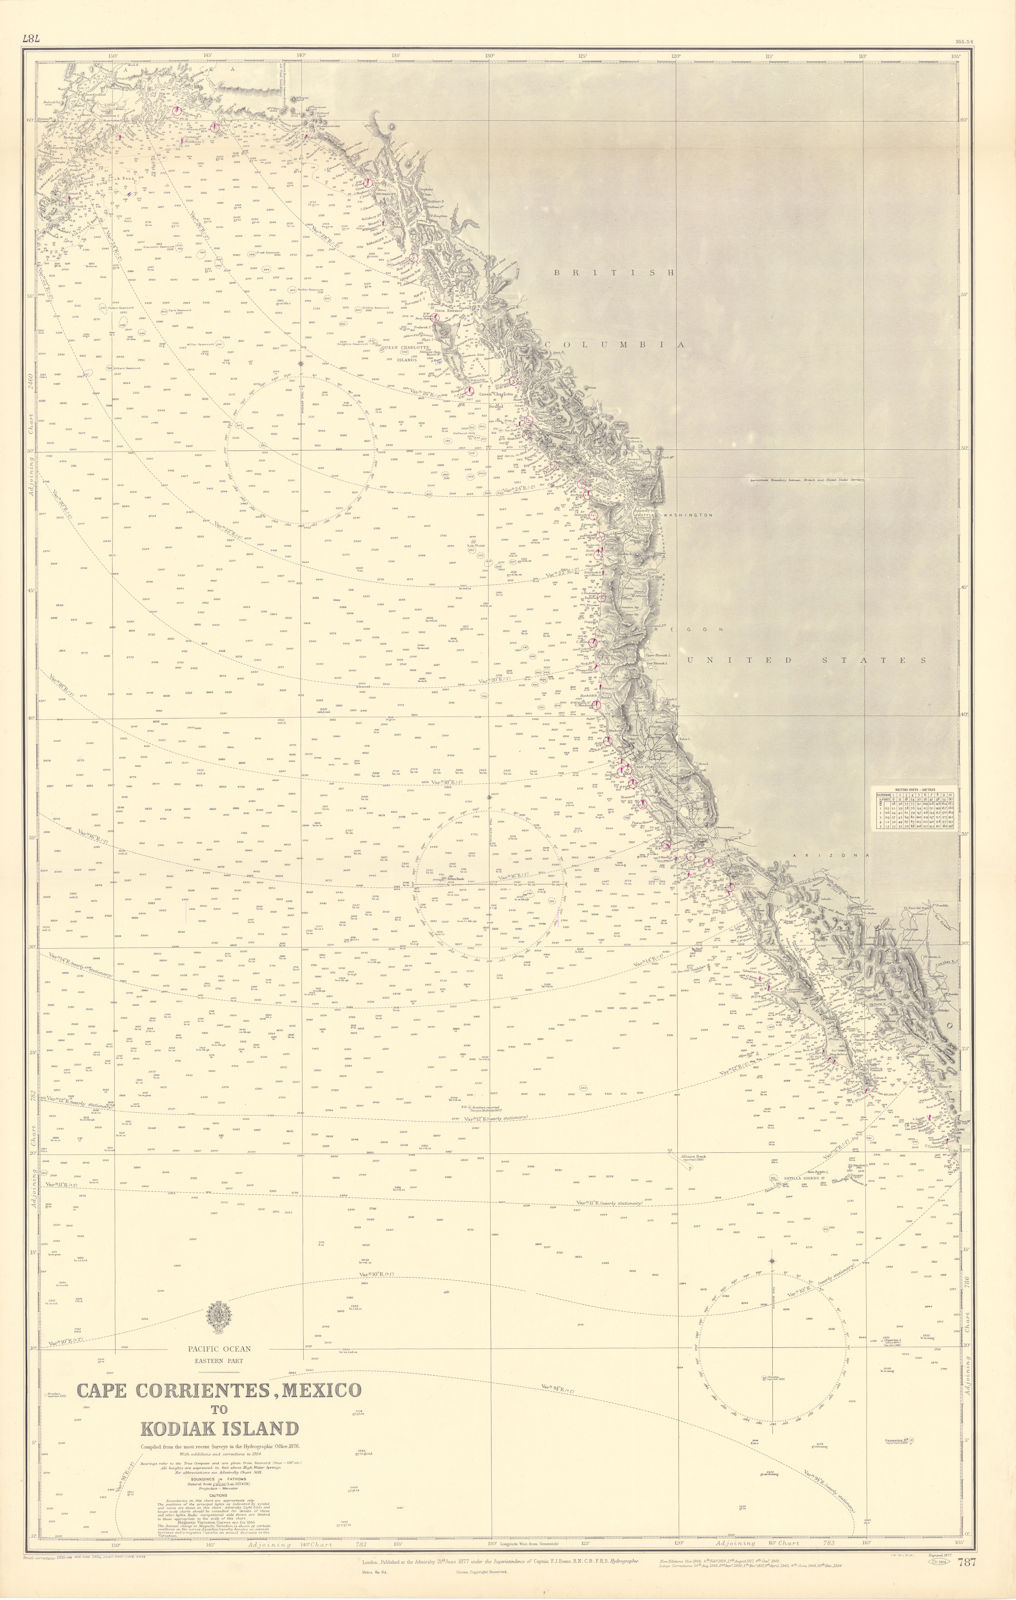 Eastern Pacific. North America West coast. ADMIRALTY sea chart 1877 (1956) map